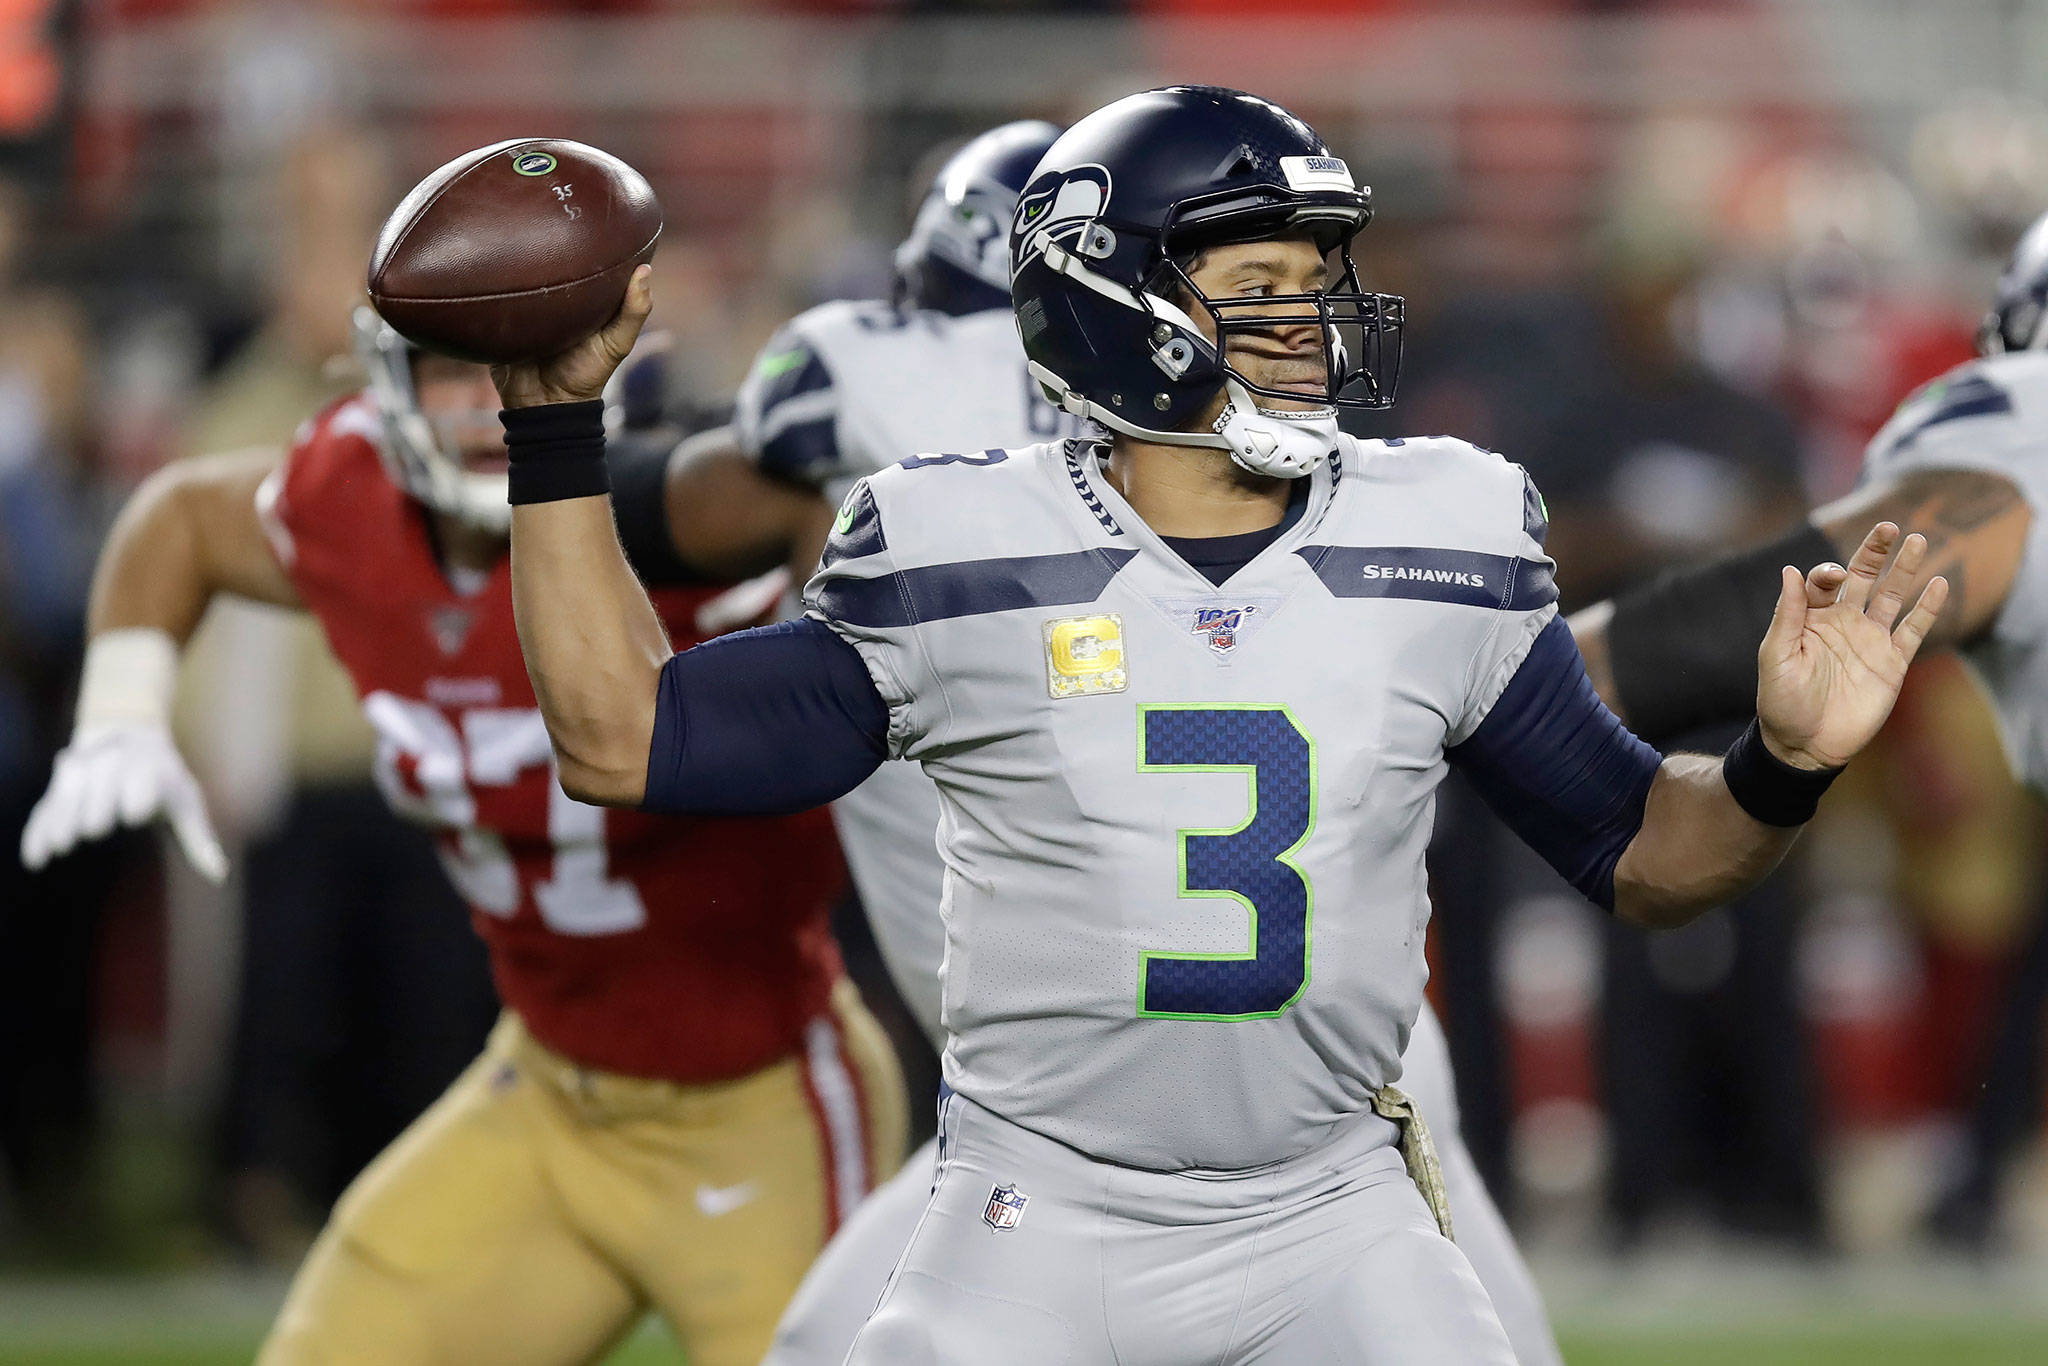 Everyone is talking about Marshawn Lynch, but Sunday night's Seahawks-49ers  game really is about Russell Wilson